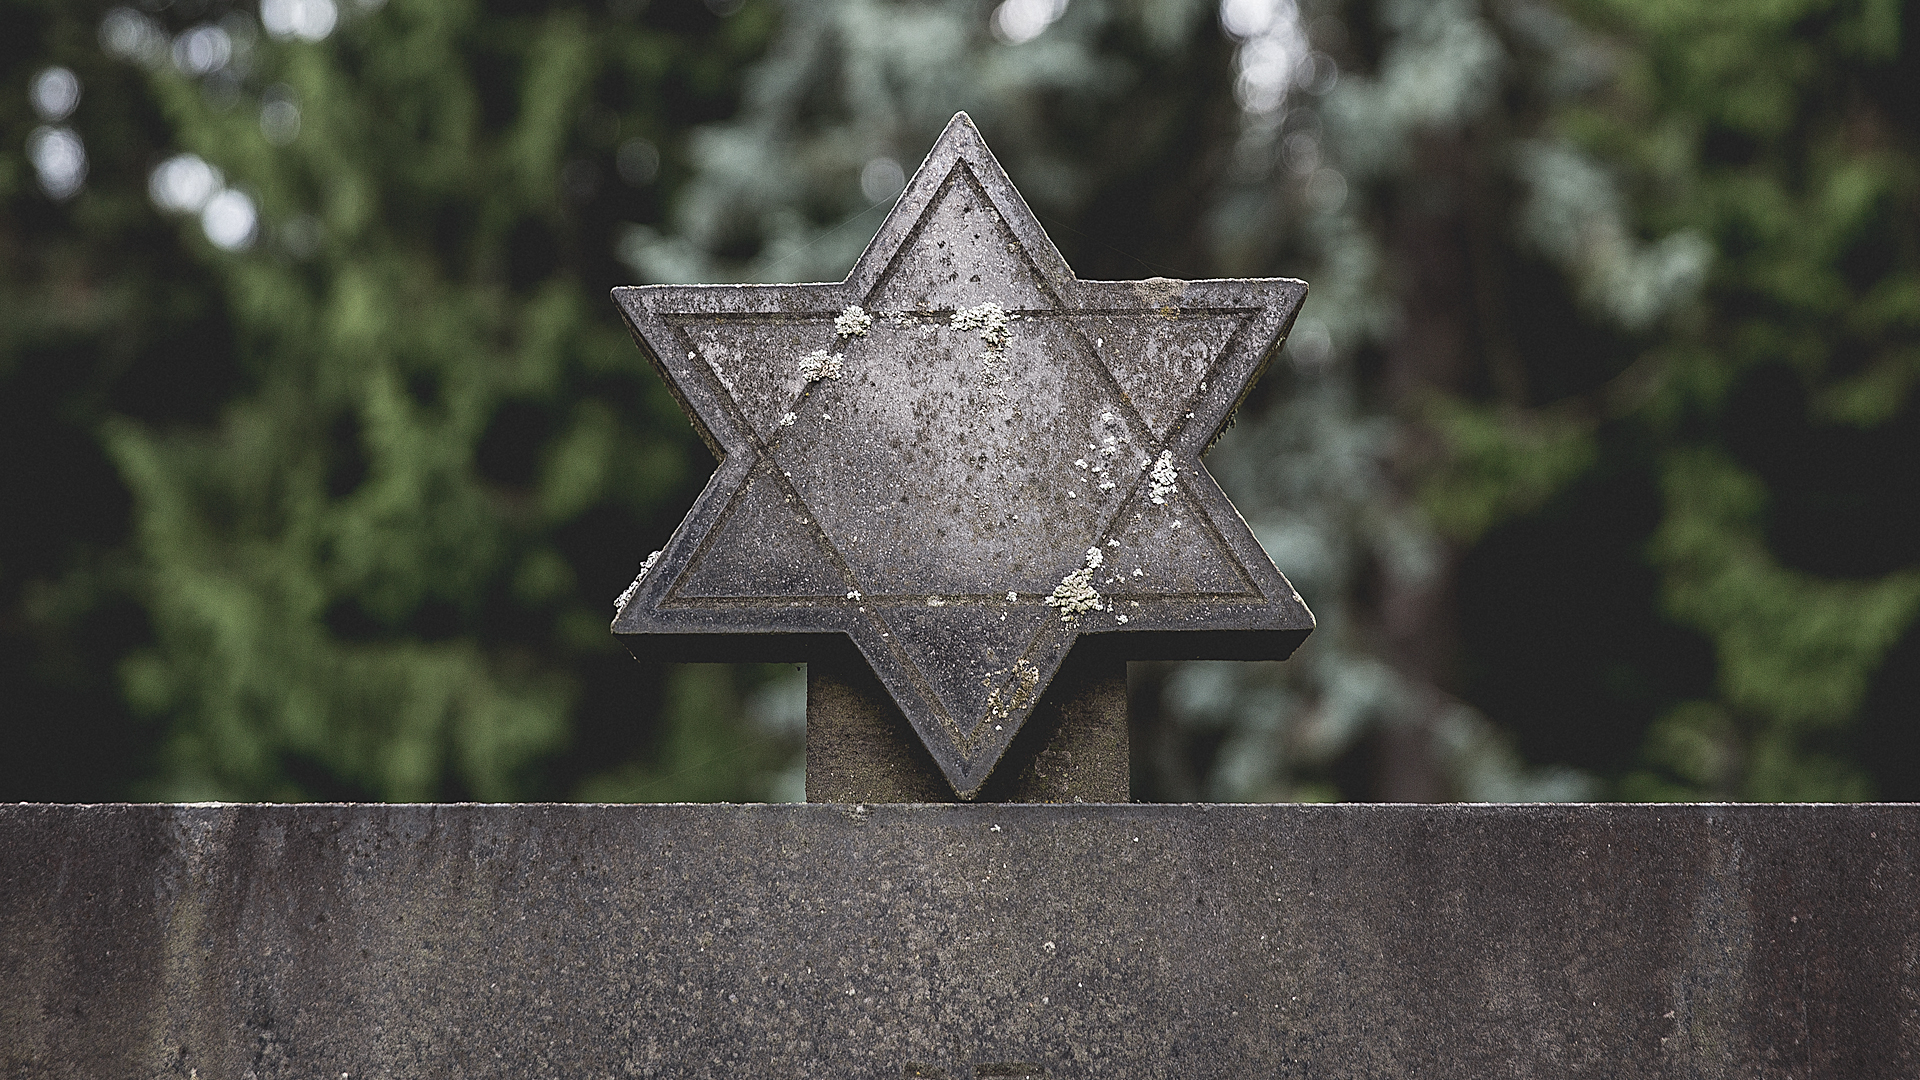 Day 209: The Star of David